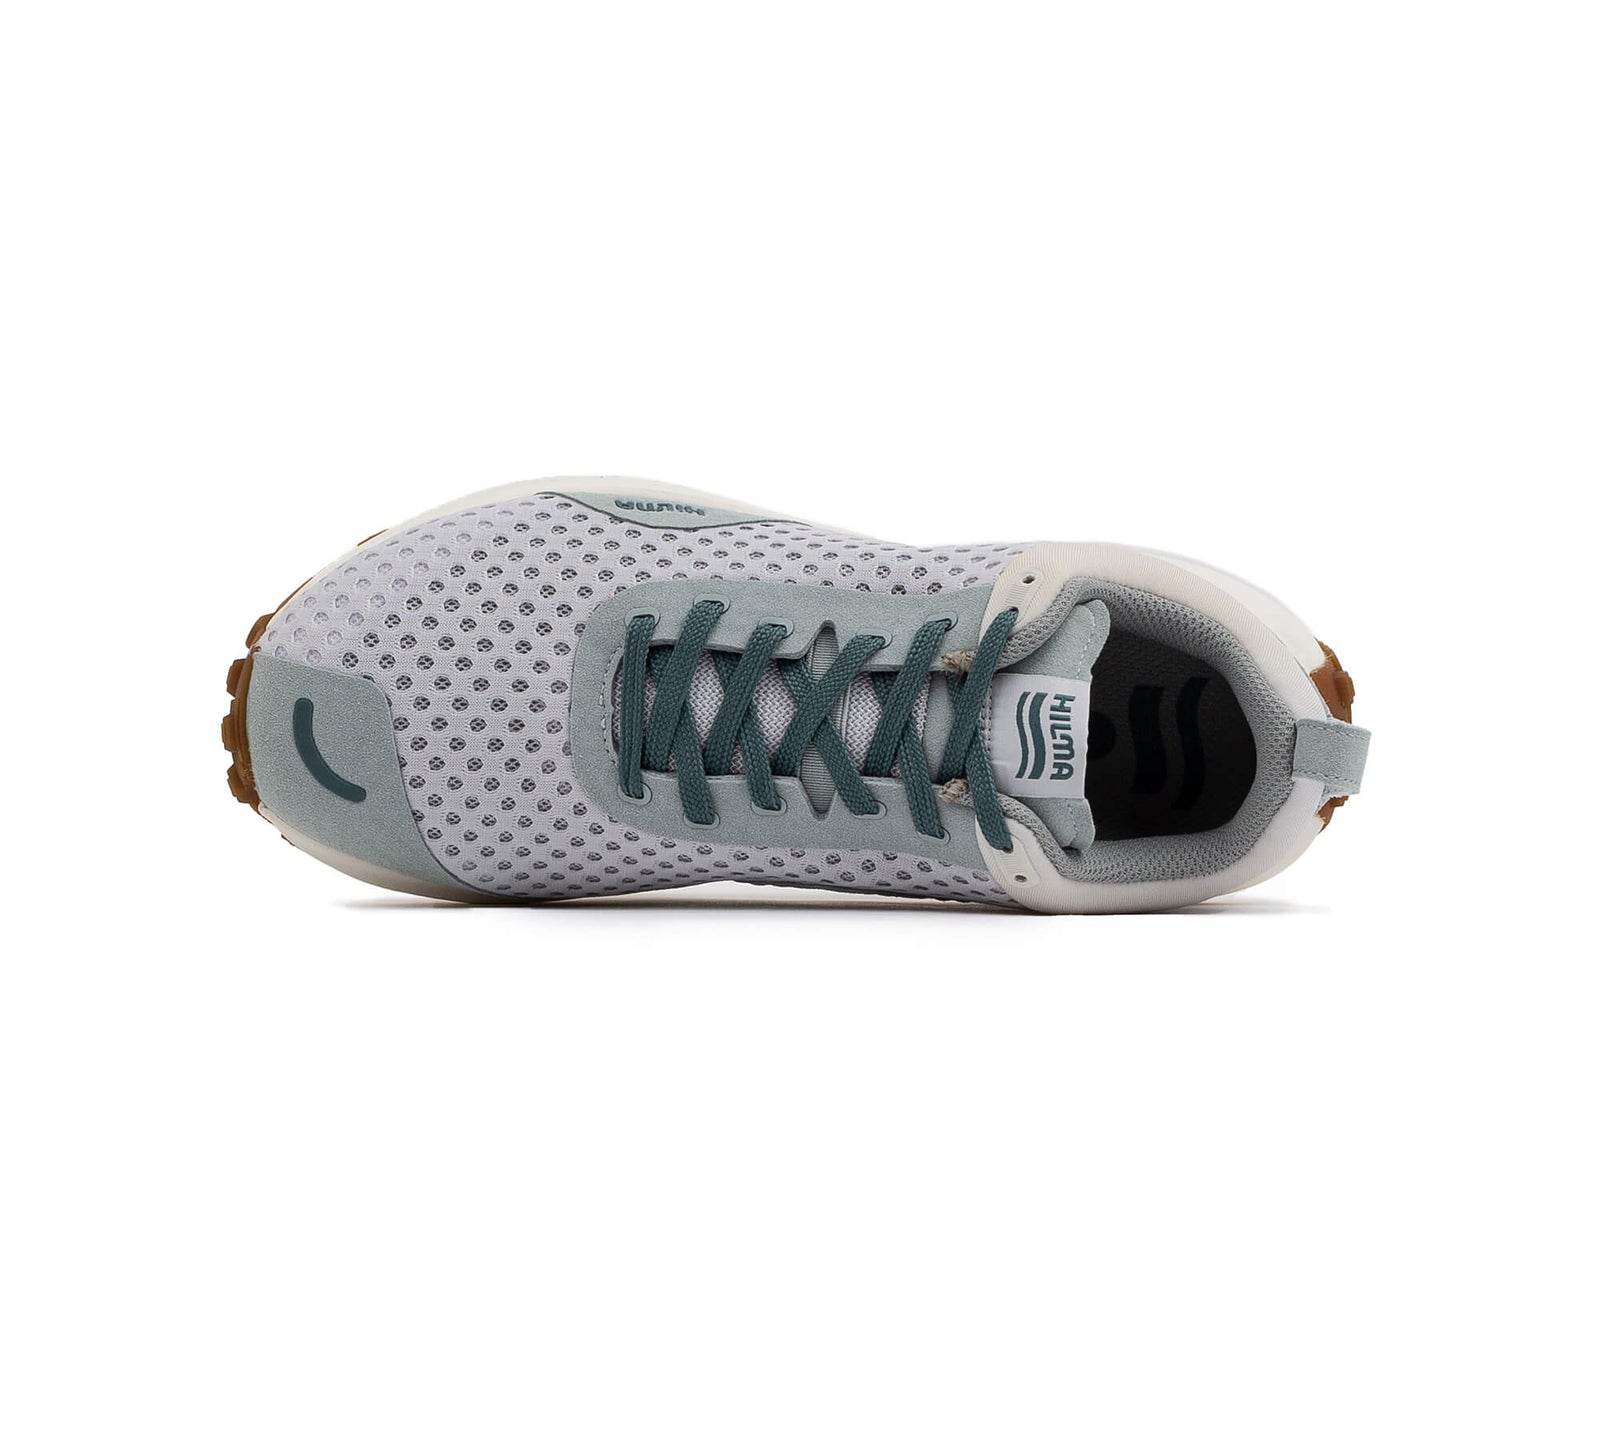 Top down view of right Everywhere Hilma Running shoe in Mirage Grey